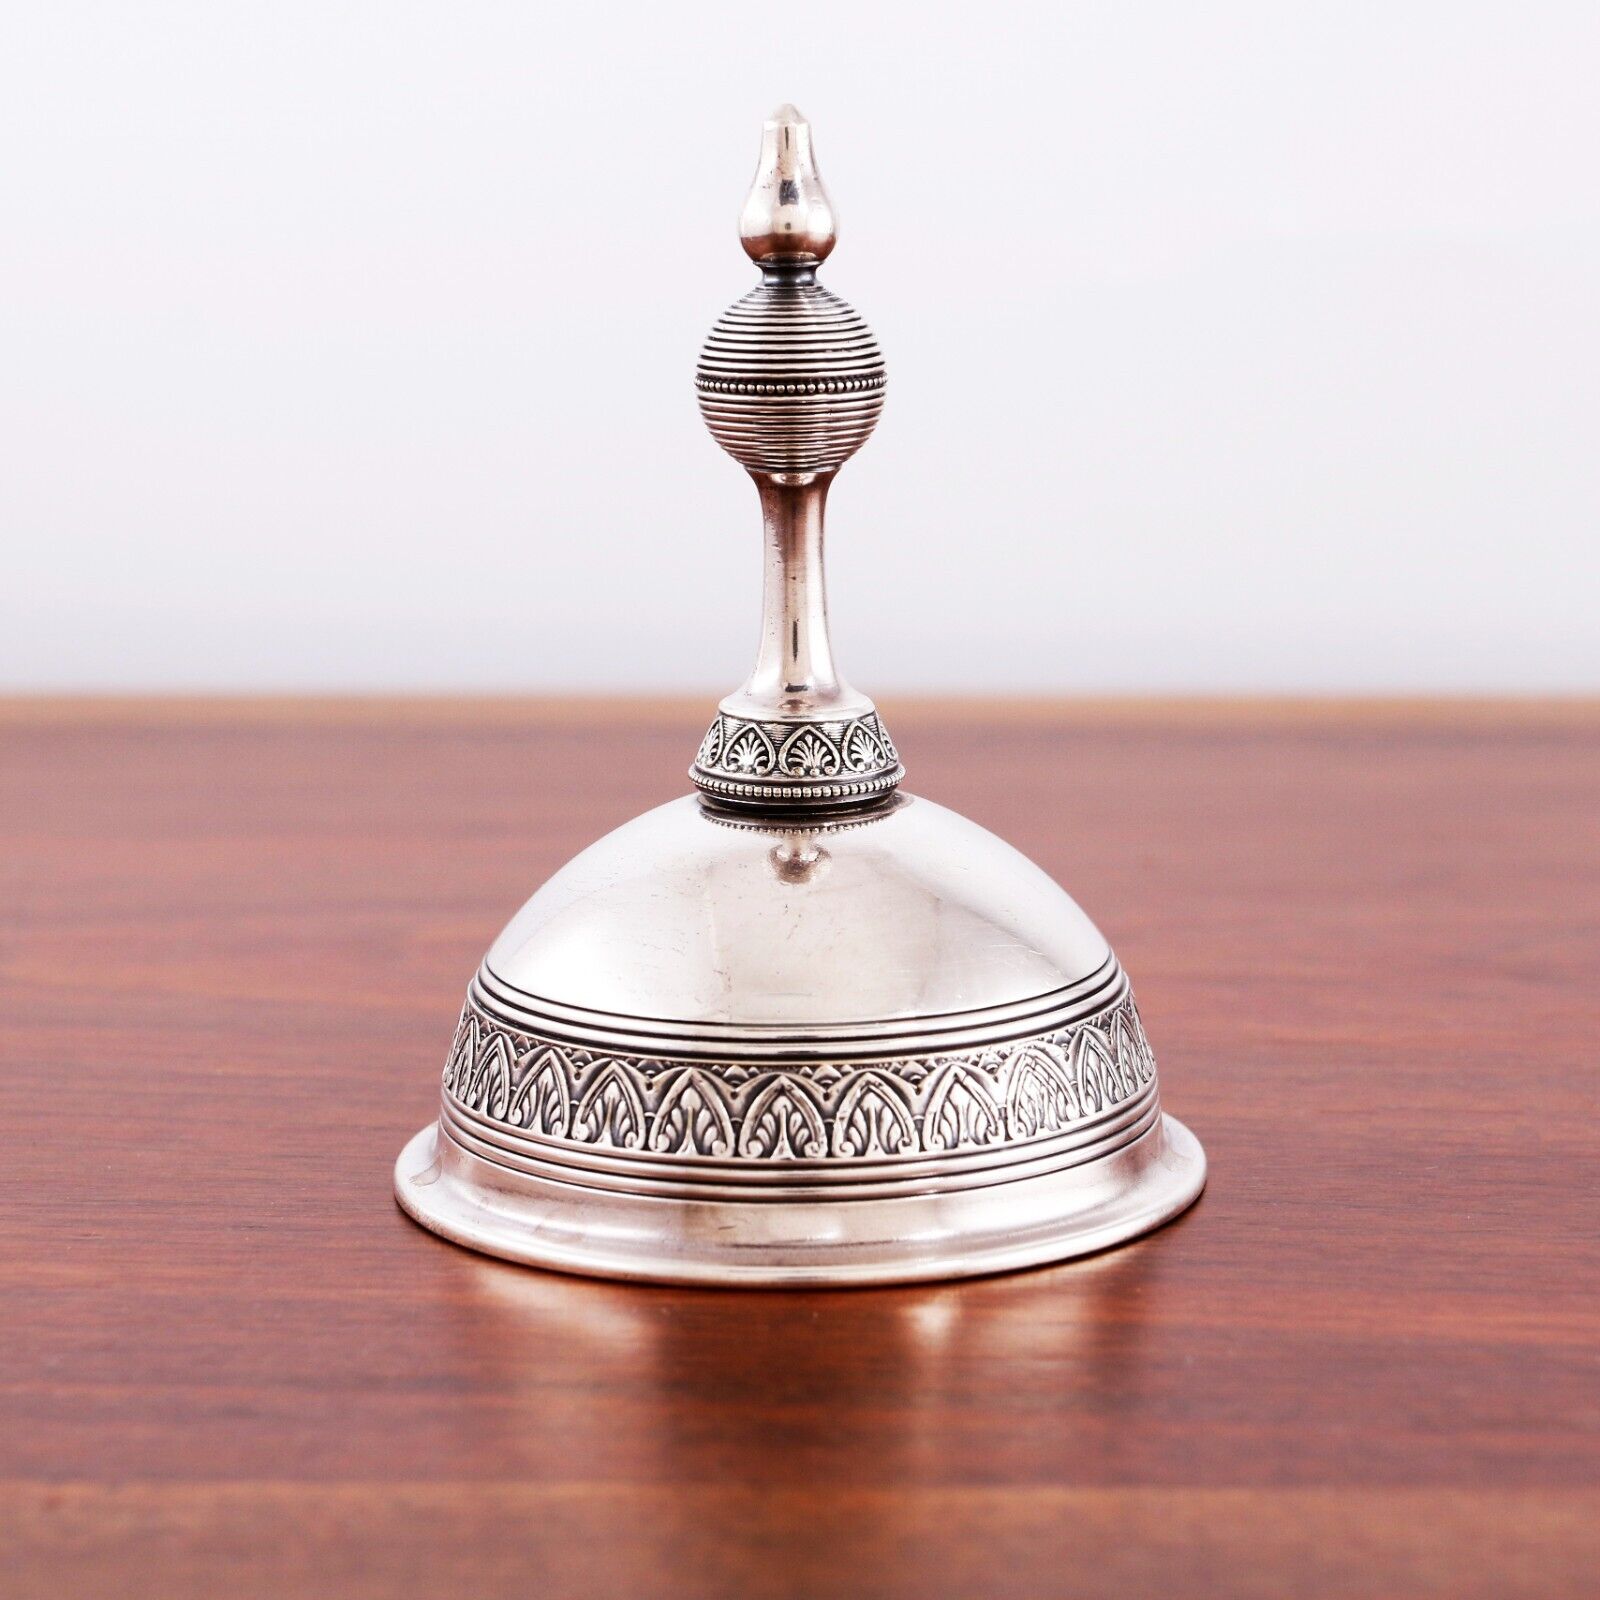 Antique Valuations: SUPERB GORHAM AESTHETIC SILVERPLATE TABLE BELL EGG AND DART 1881 NO MONOGRAM